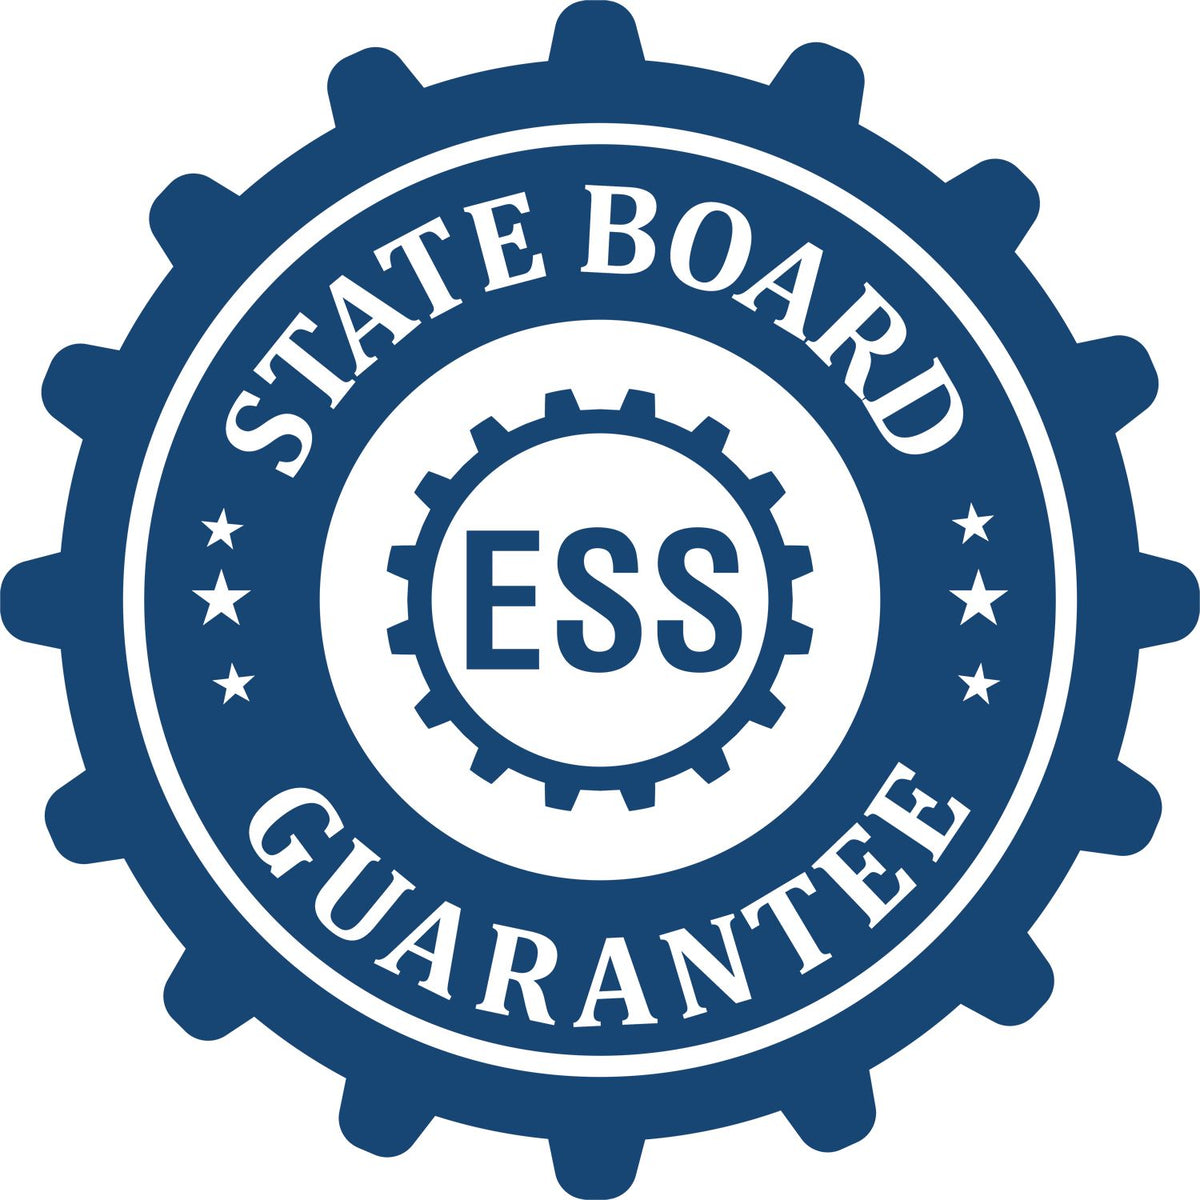 An emblem in a gear shape illustrating a state board guarantee for the Digital New Mexico PE Stamp and Electronic Seal for New Mexico Engineer product.